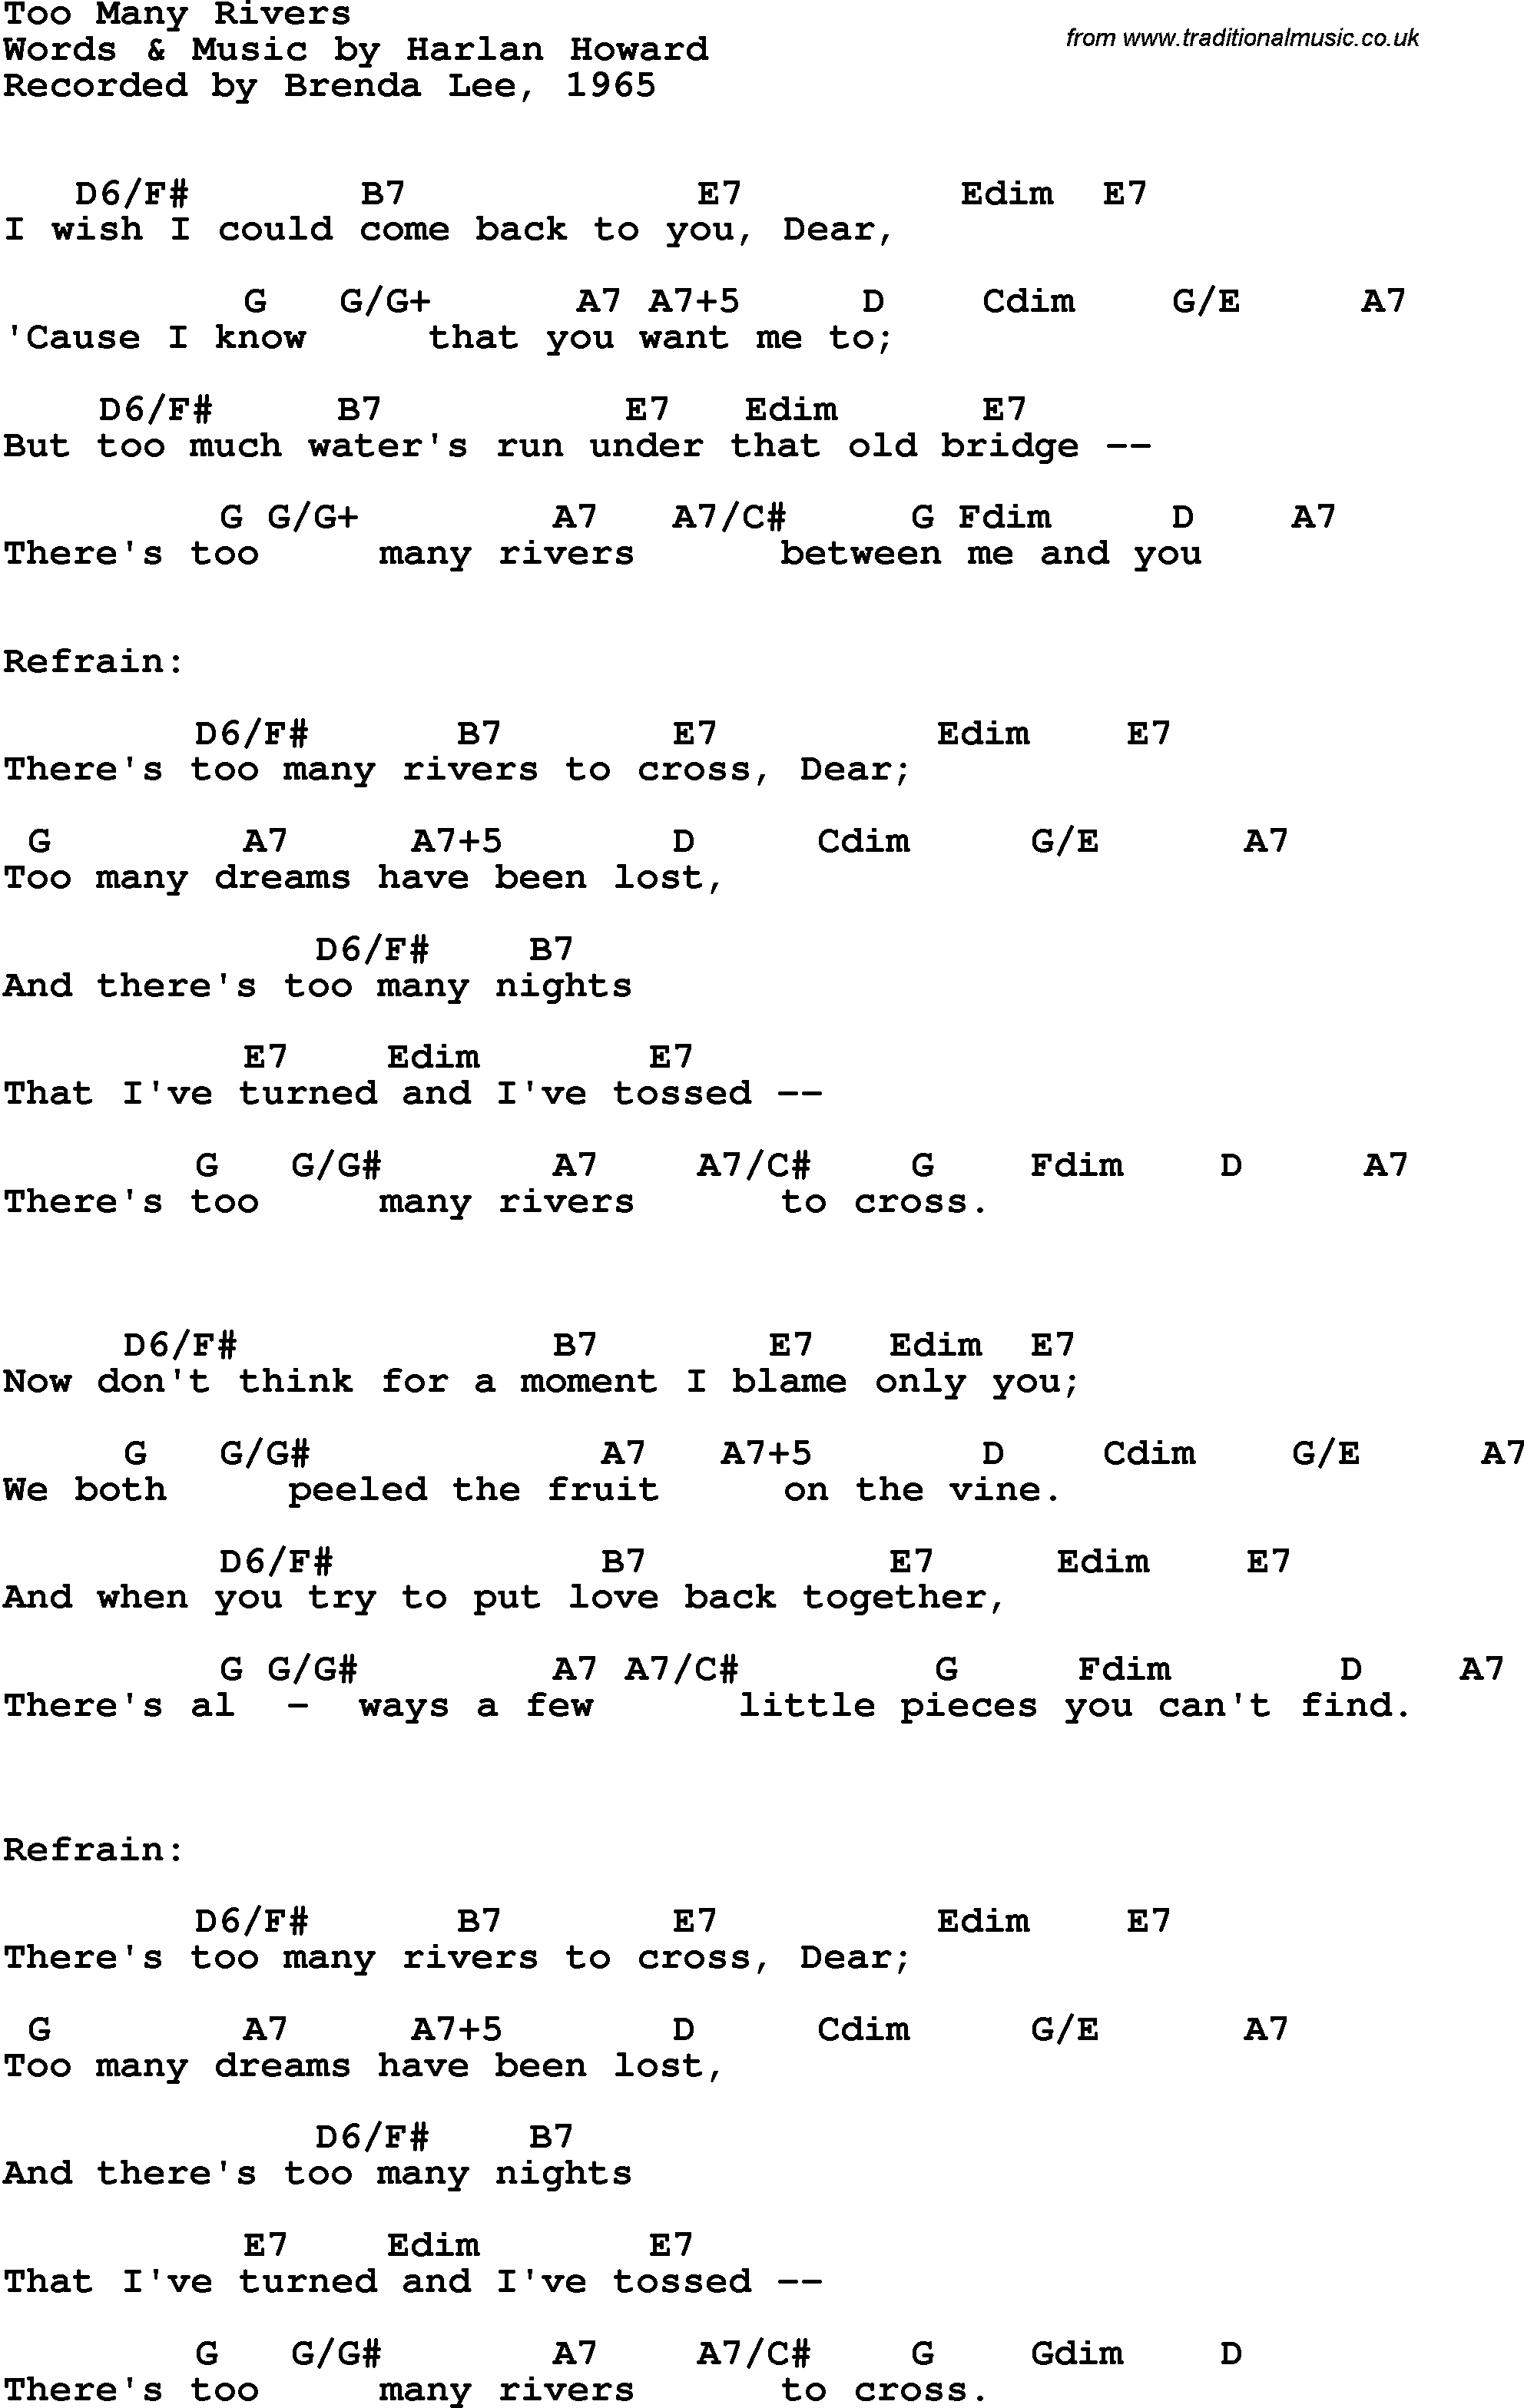 Song lyrics with guitar chords for Too Many Rivers - Brenda Lee, 1965